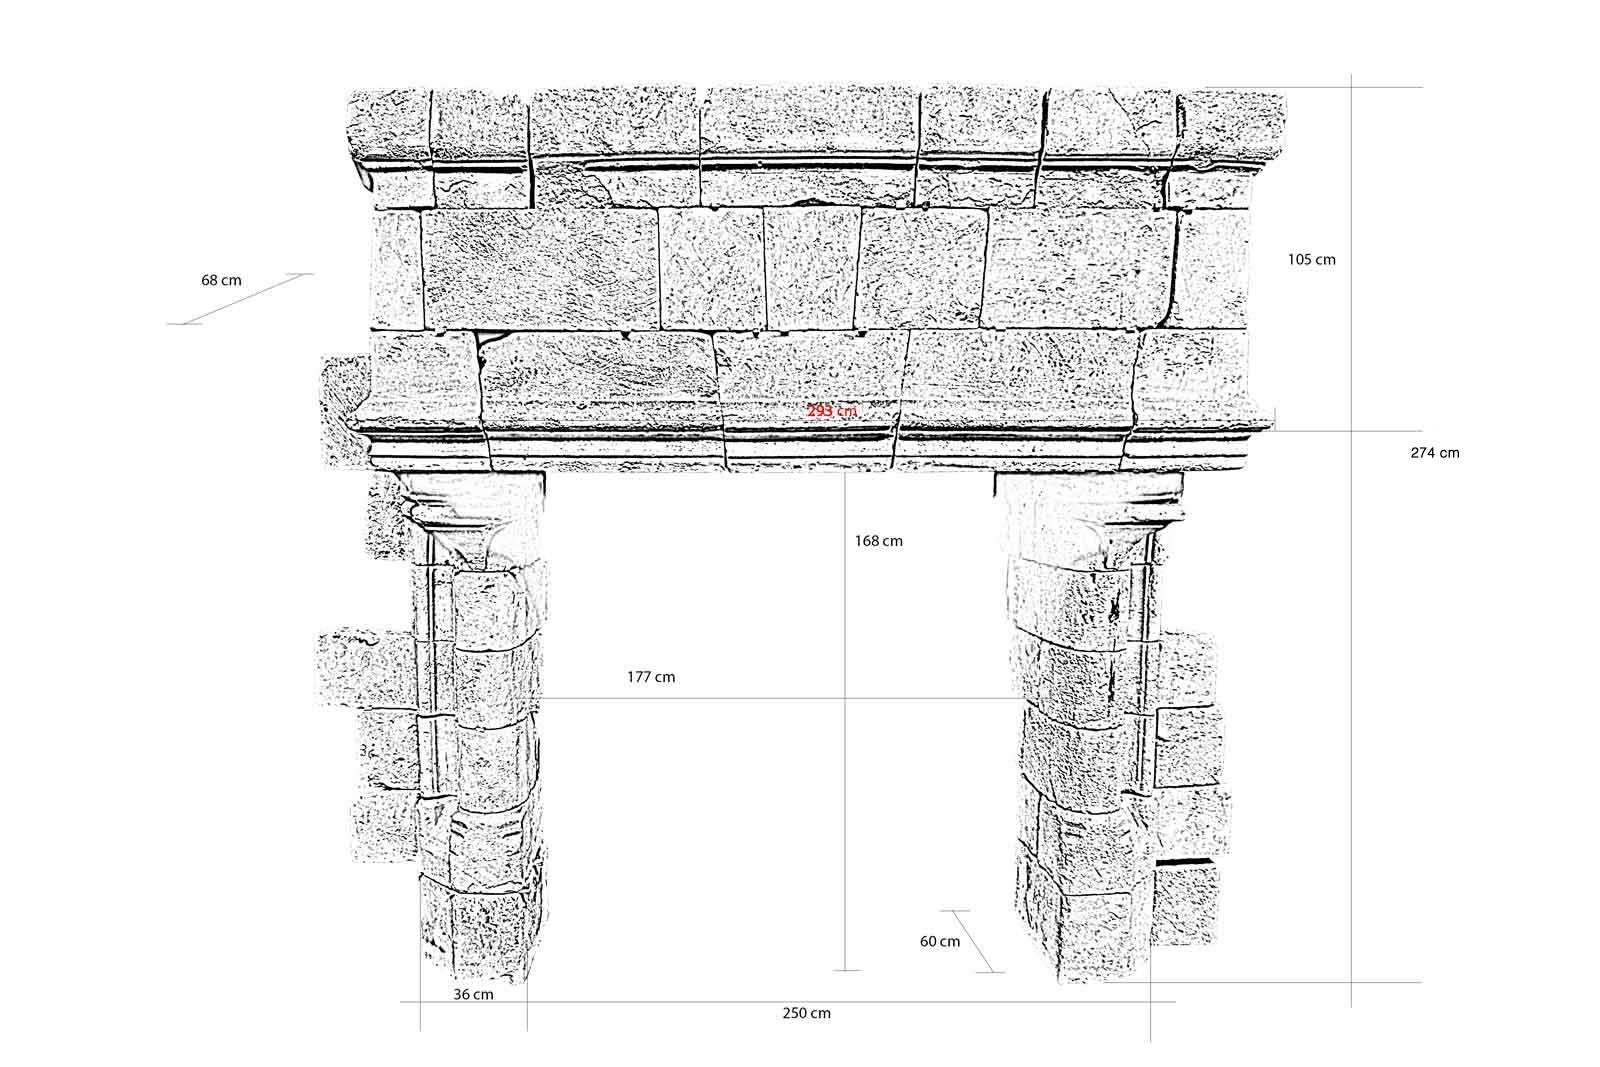 Dating from the 15th century, Gothic limestone fireplace with a lintel lined with lateral gable resting on engaged columns animated of capitals.